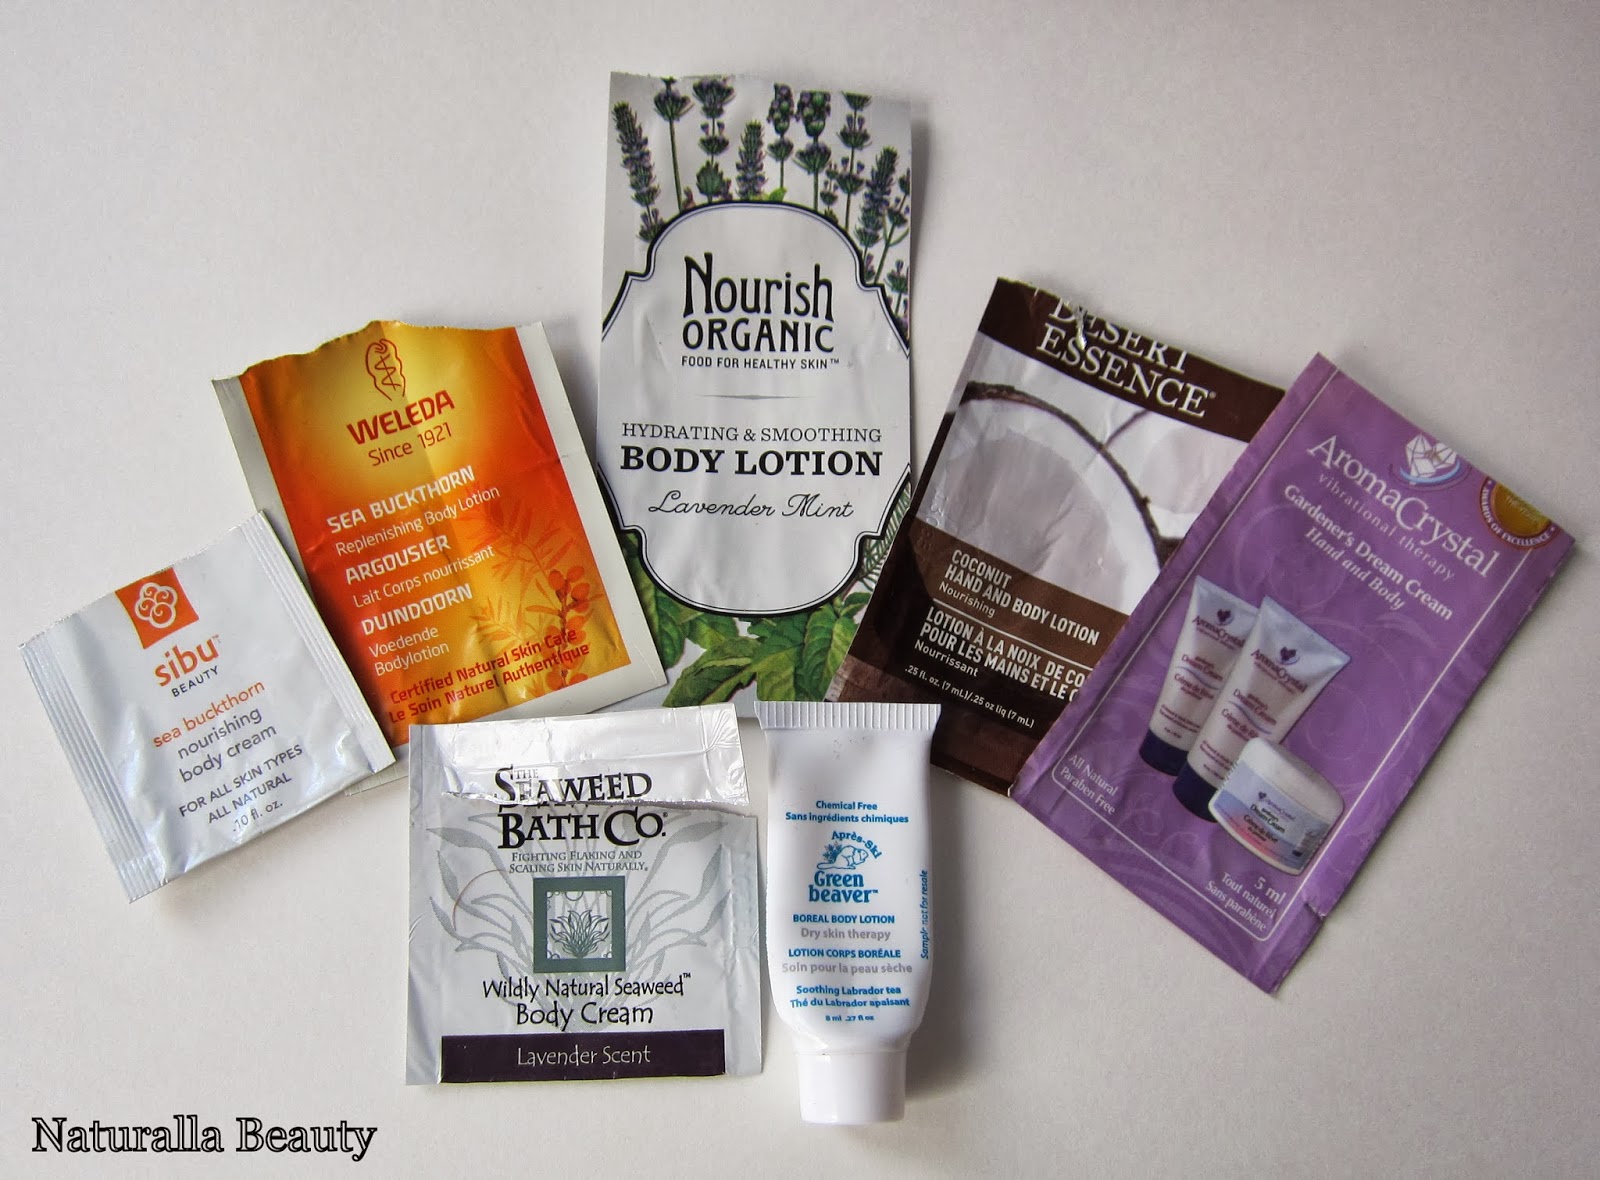 Free body lotion samples